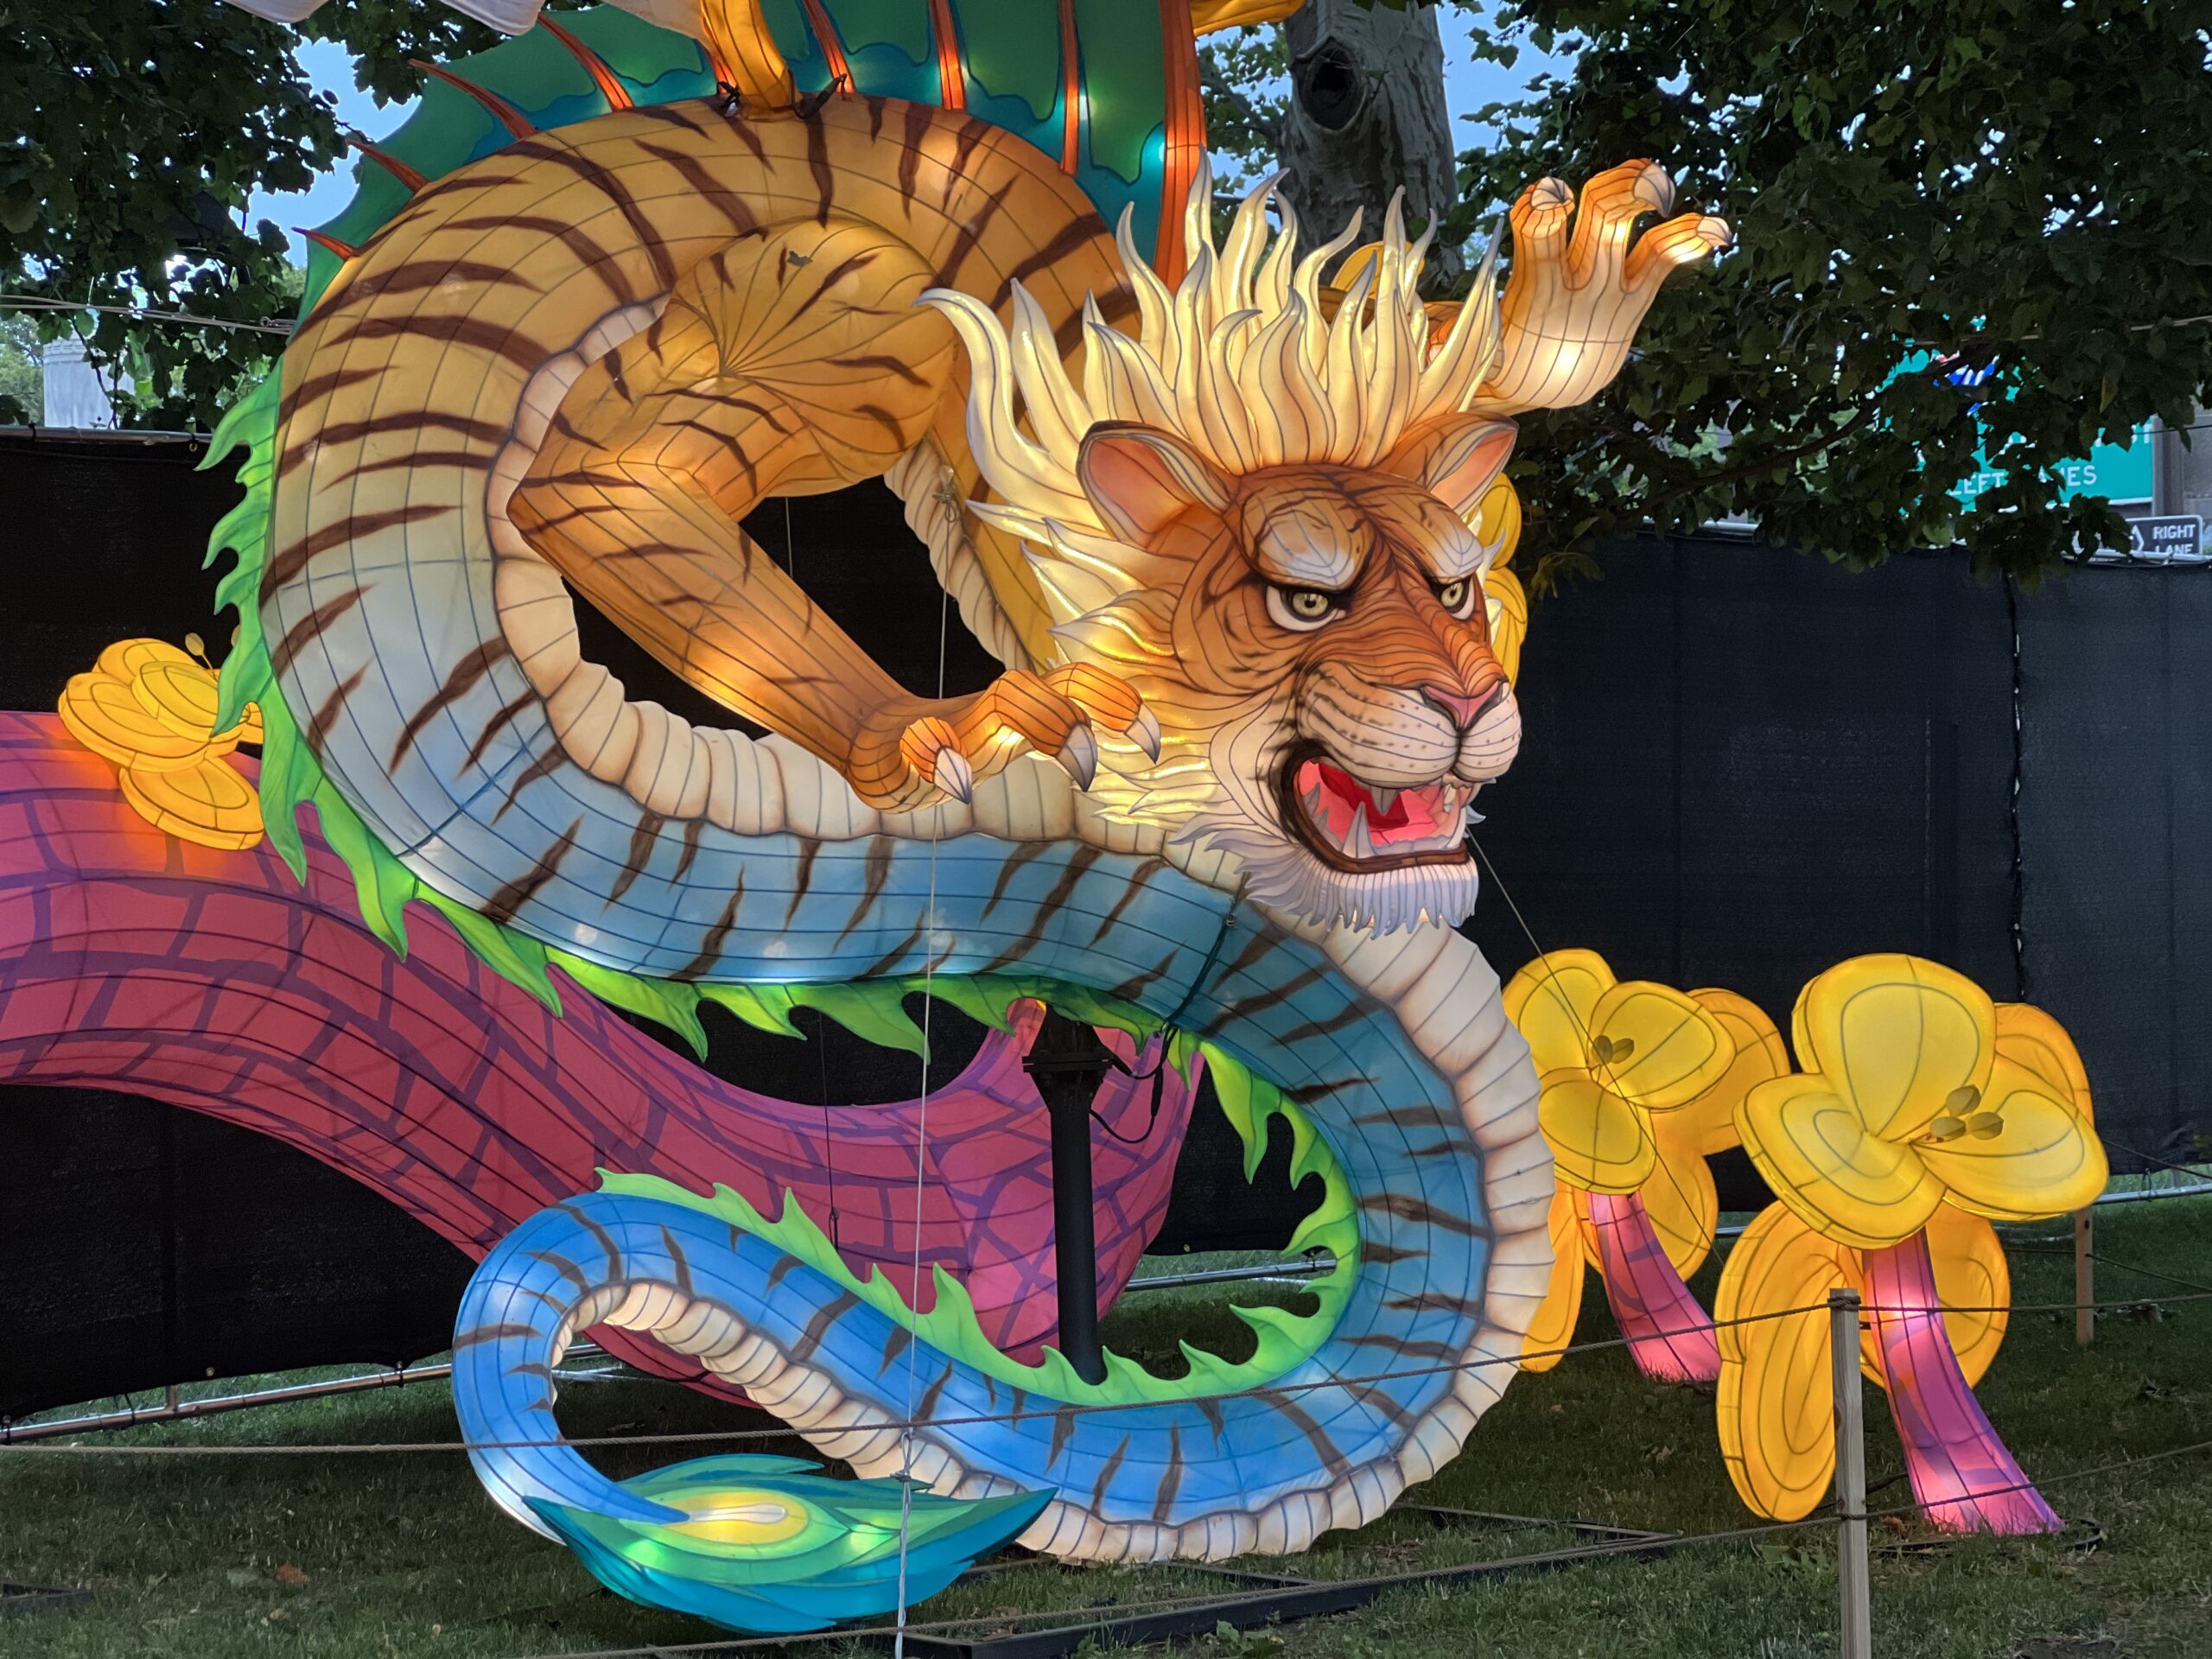 Mythical Creature Zoo Wu lion dragon at Philadelphia Chinese Lantern Festival lit up at dusk WIDE